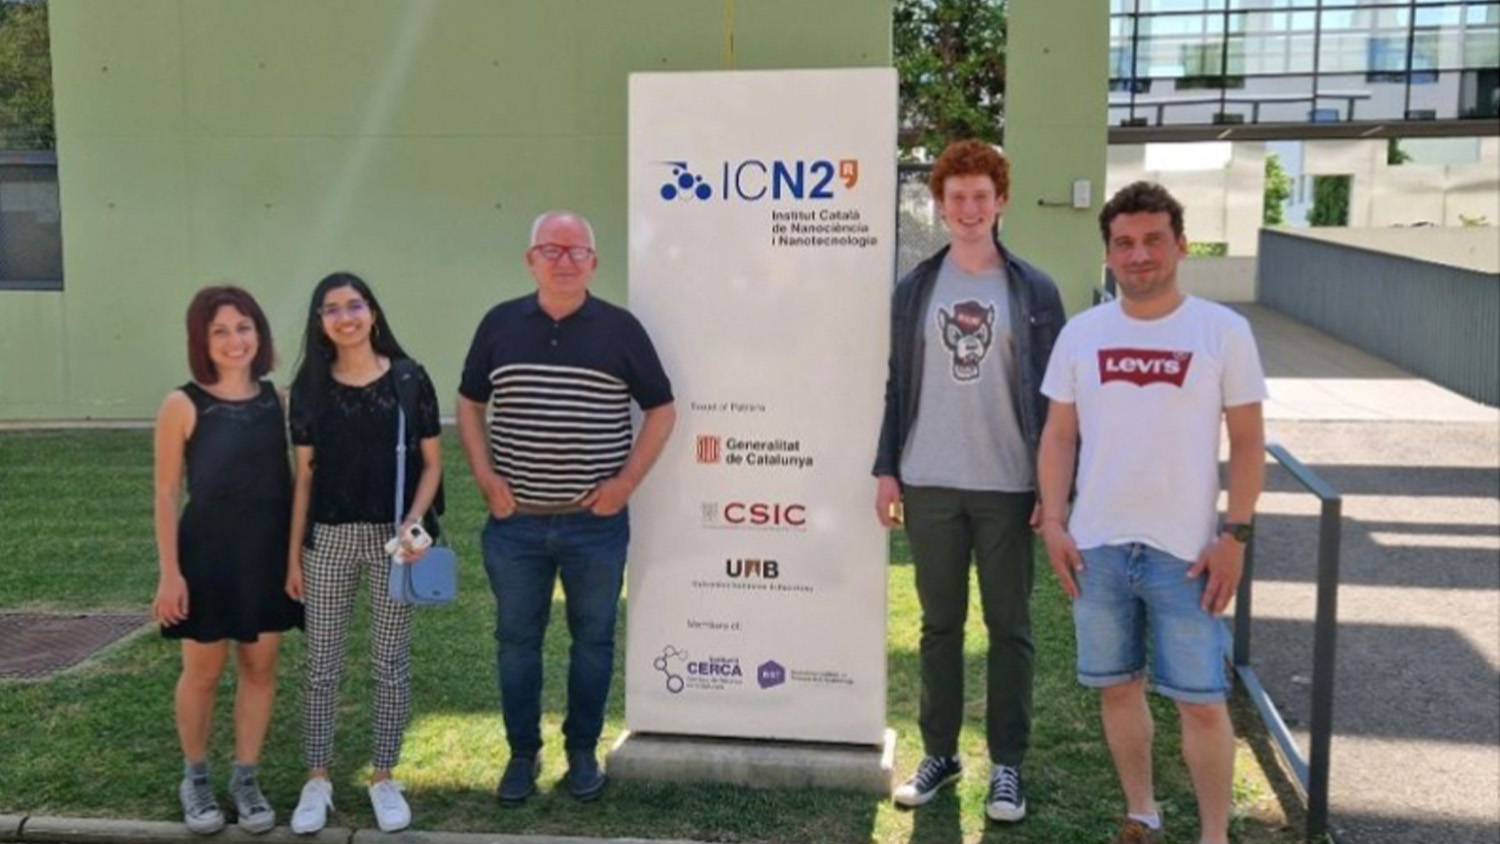 Robert Kobrin, second from right, and fellow researchers on the first day of summer research at ICN2.